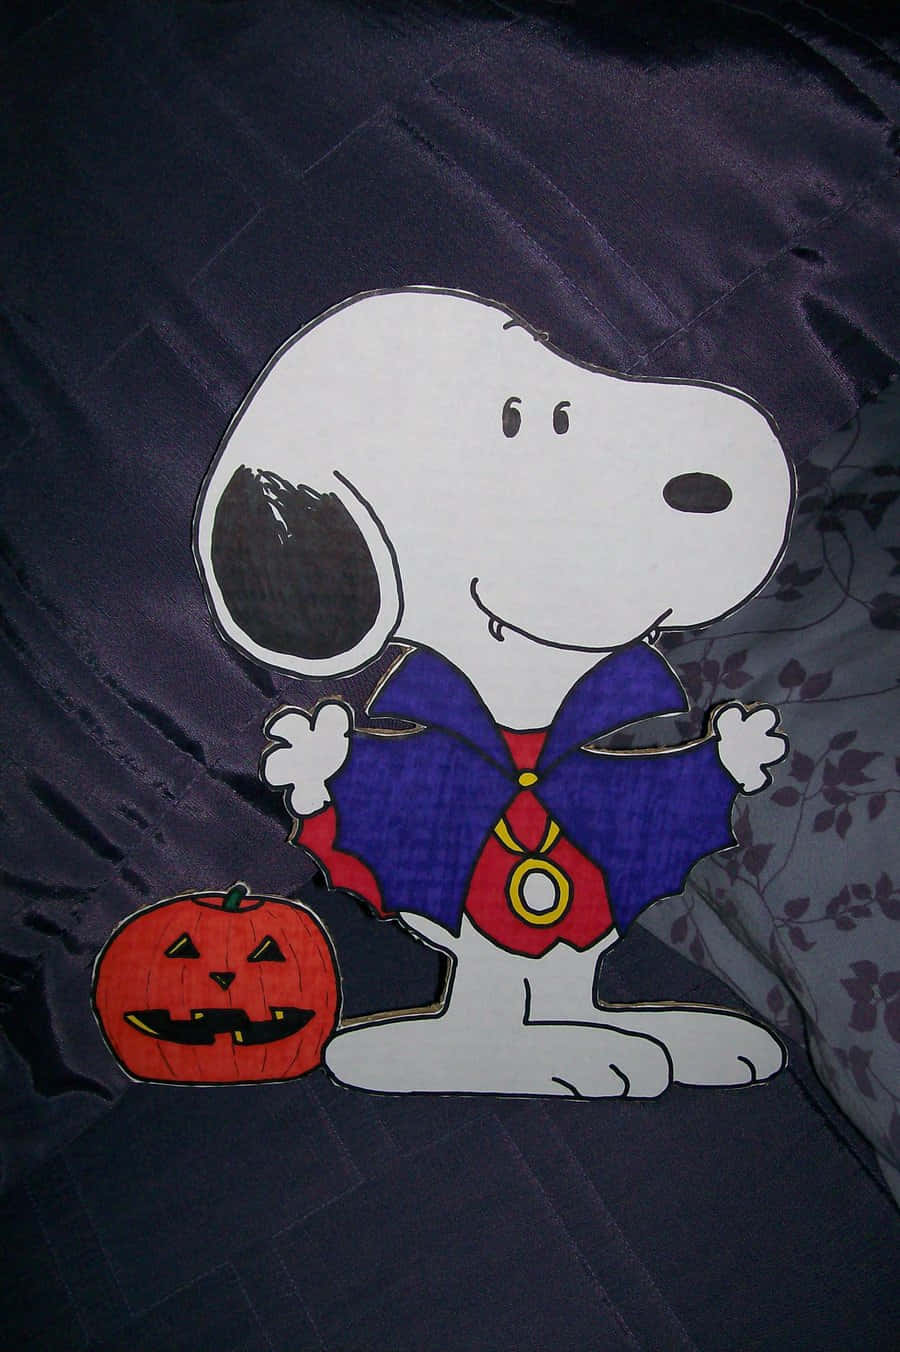 "It's time for Halloween trick-or-treating with Snoopy and the Peanuts gang!" Wallpaper